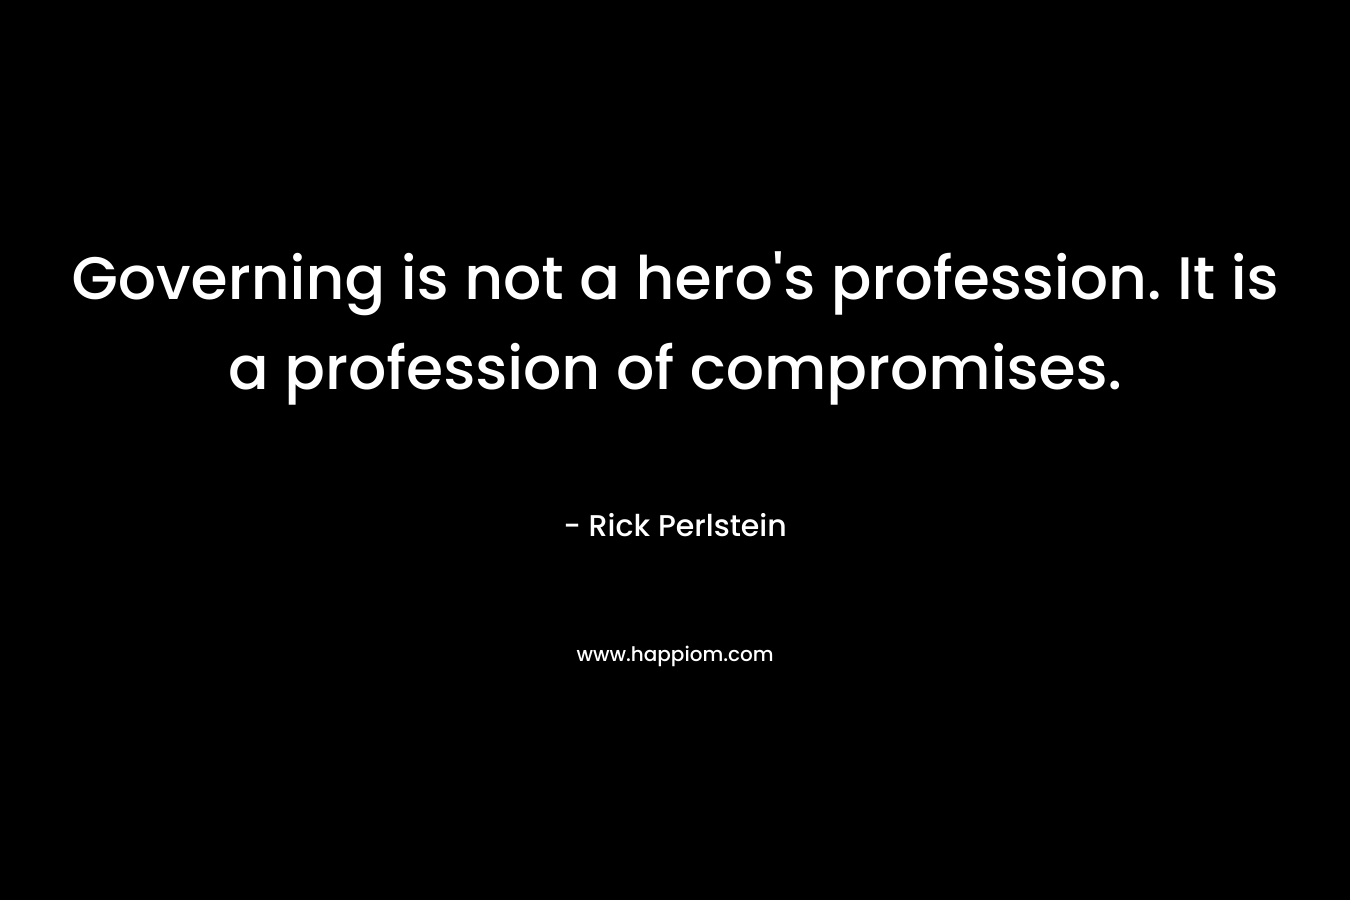 Governing is not a hero’s profession. It is a profession of compromises. – Rick Perlstein